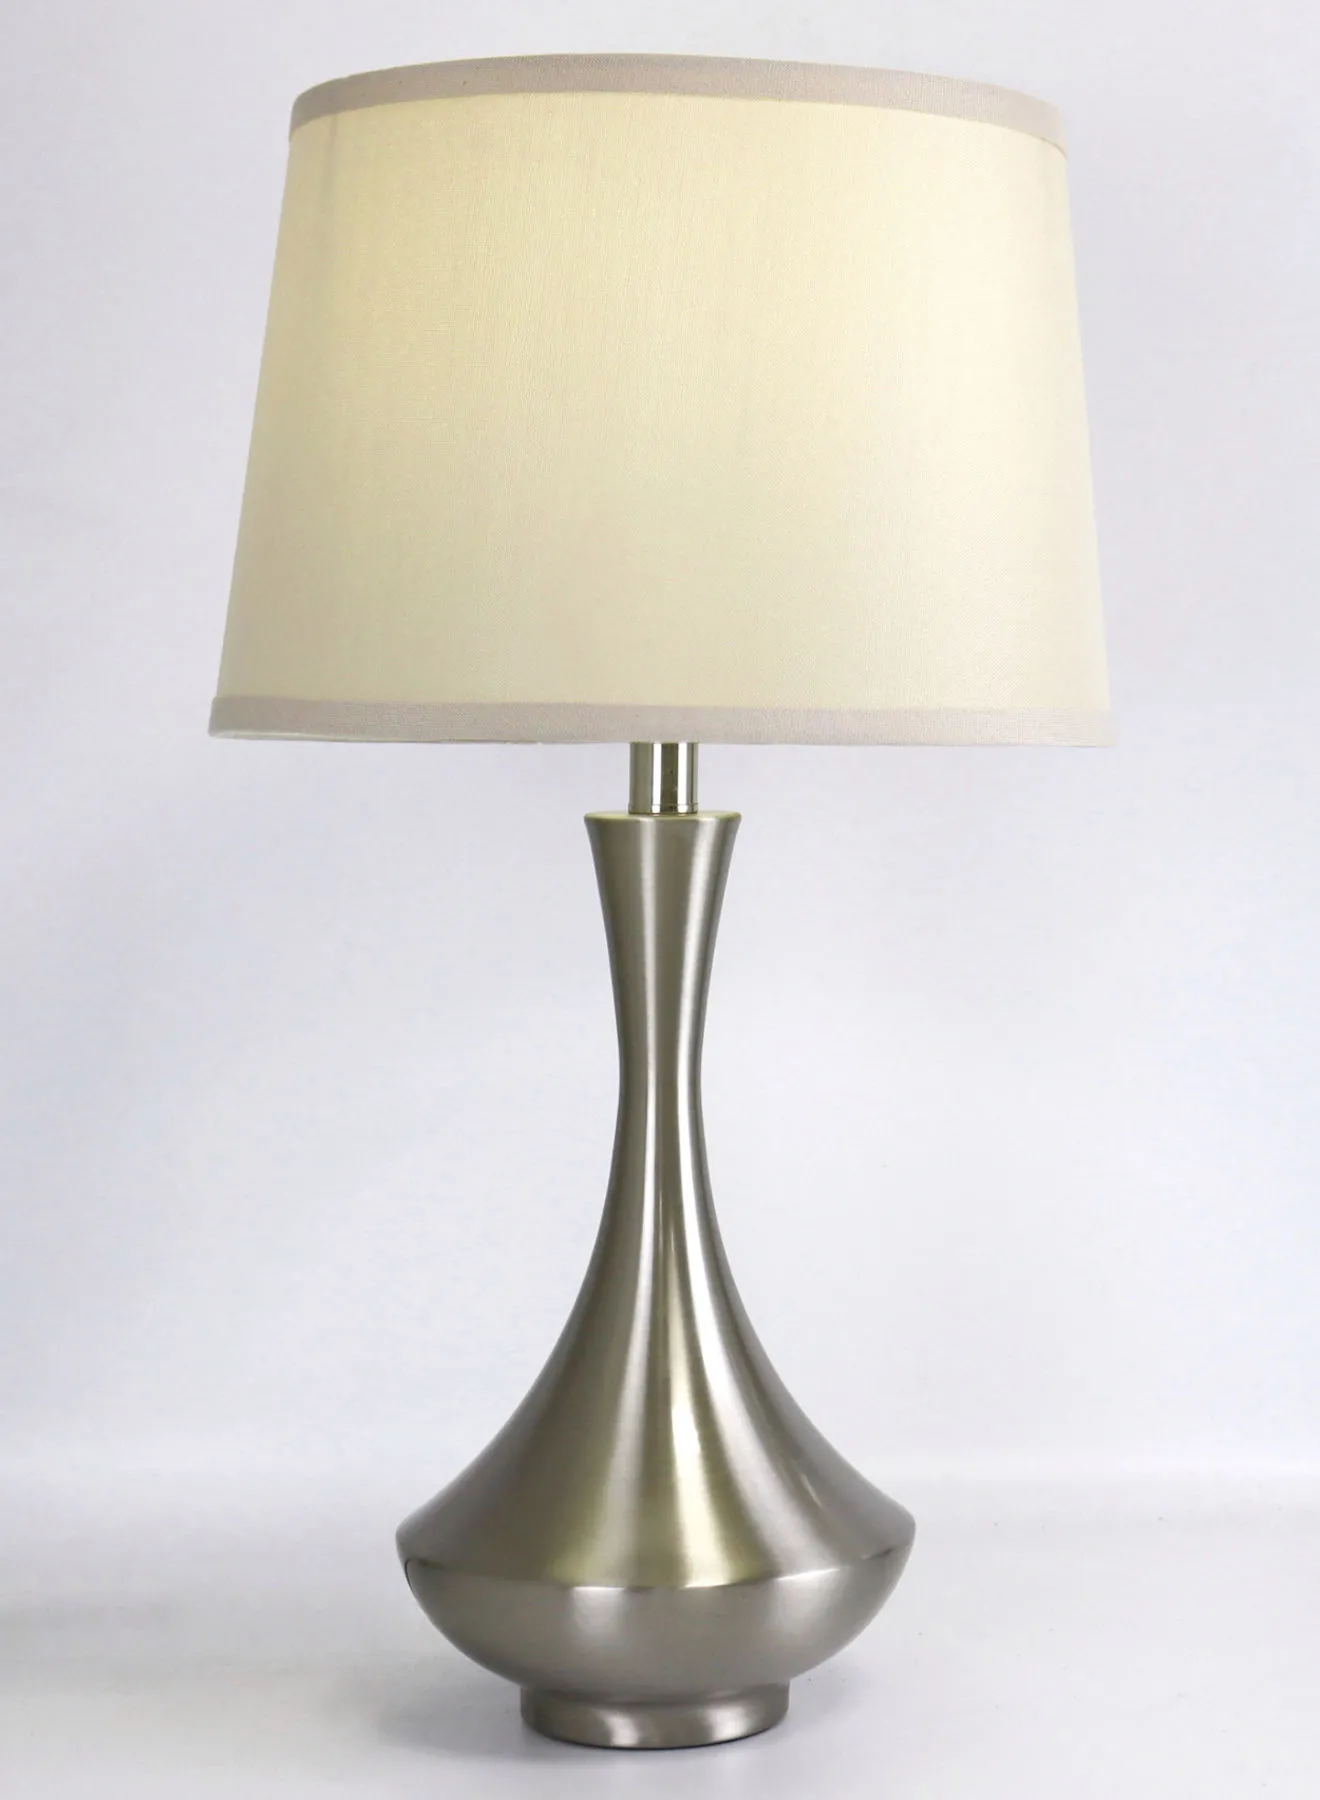 ebb & flow Modern Design Glass Table Lamp Unique Luxury Quality Material for the Perfect Stylish Home RSN71045 Satin Nickel 13 x 23.6